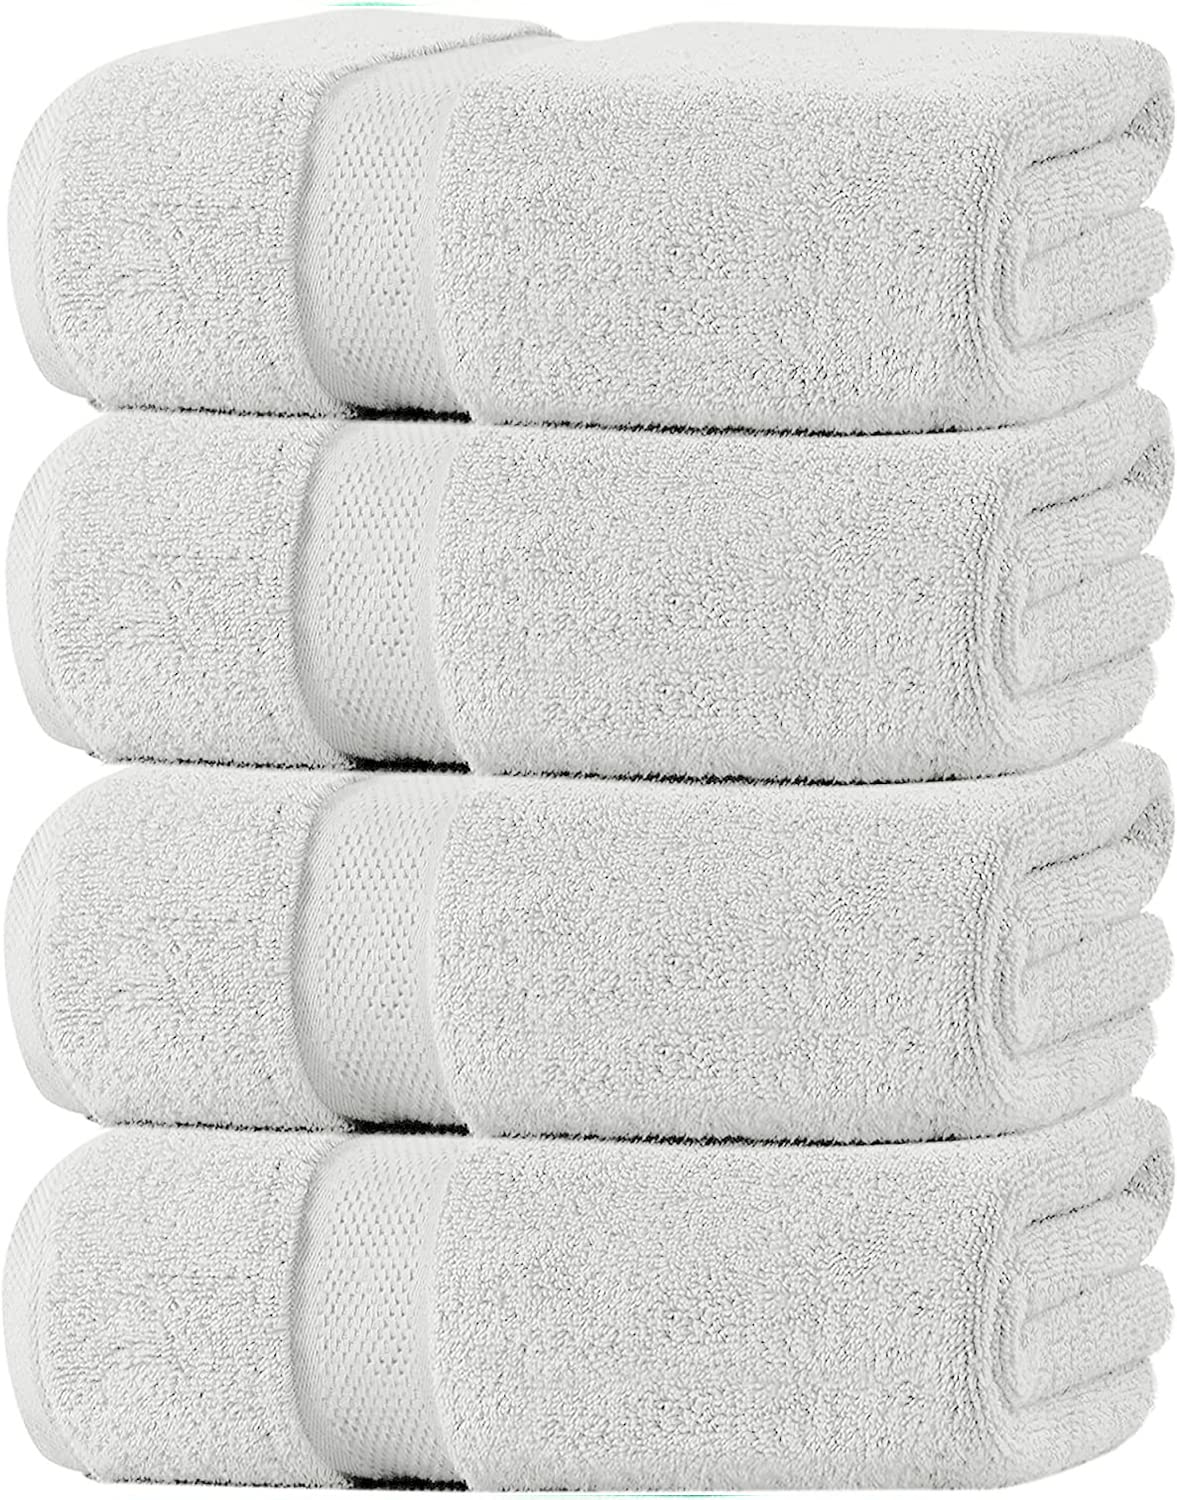 Oakias Silver Bath Towels 4 Pack 27 x 54 Inches Highly Absorbent